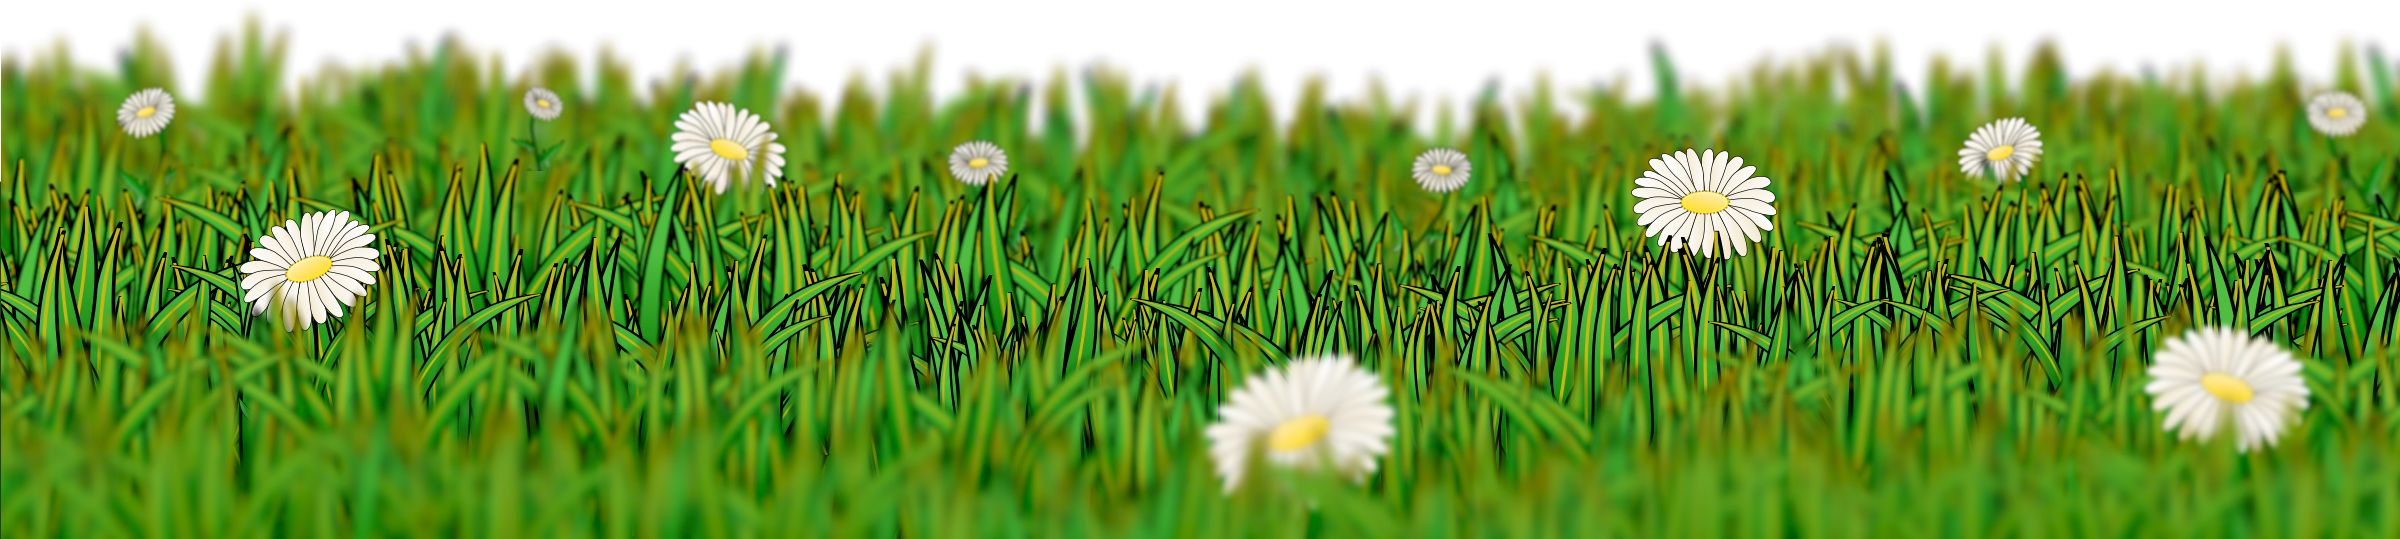 flower meadow clipart - photo #14